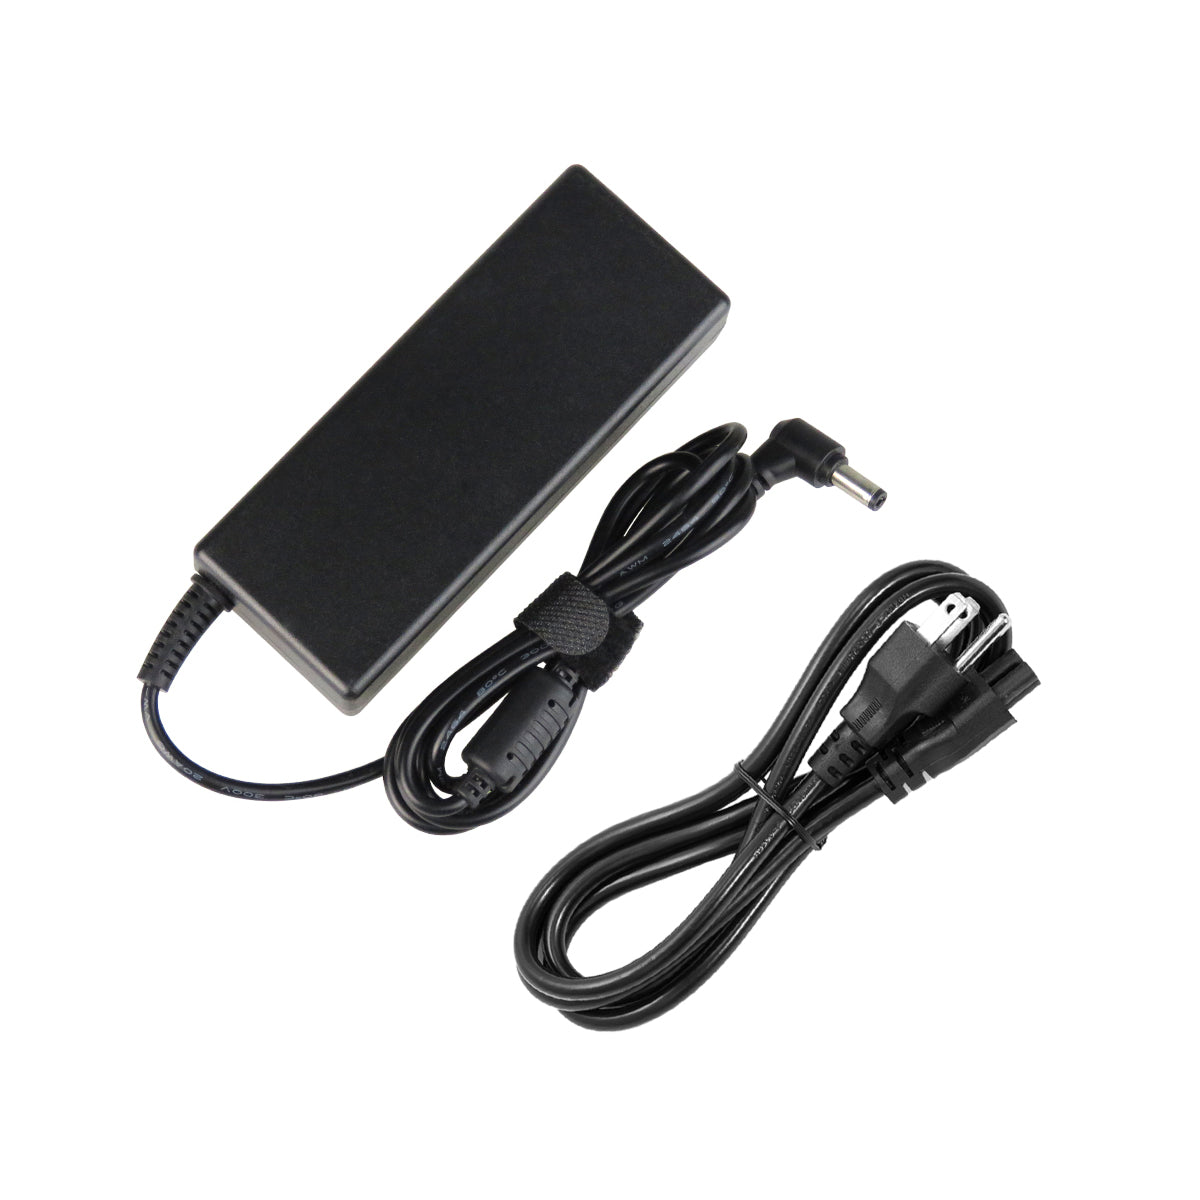 AC Adapter Charger for Toshiba Satellite p75-a7200 Notebook.